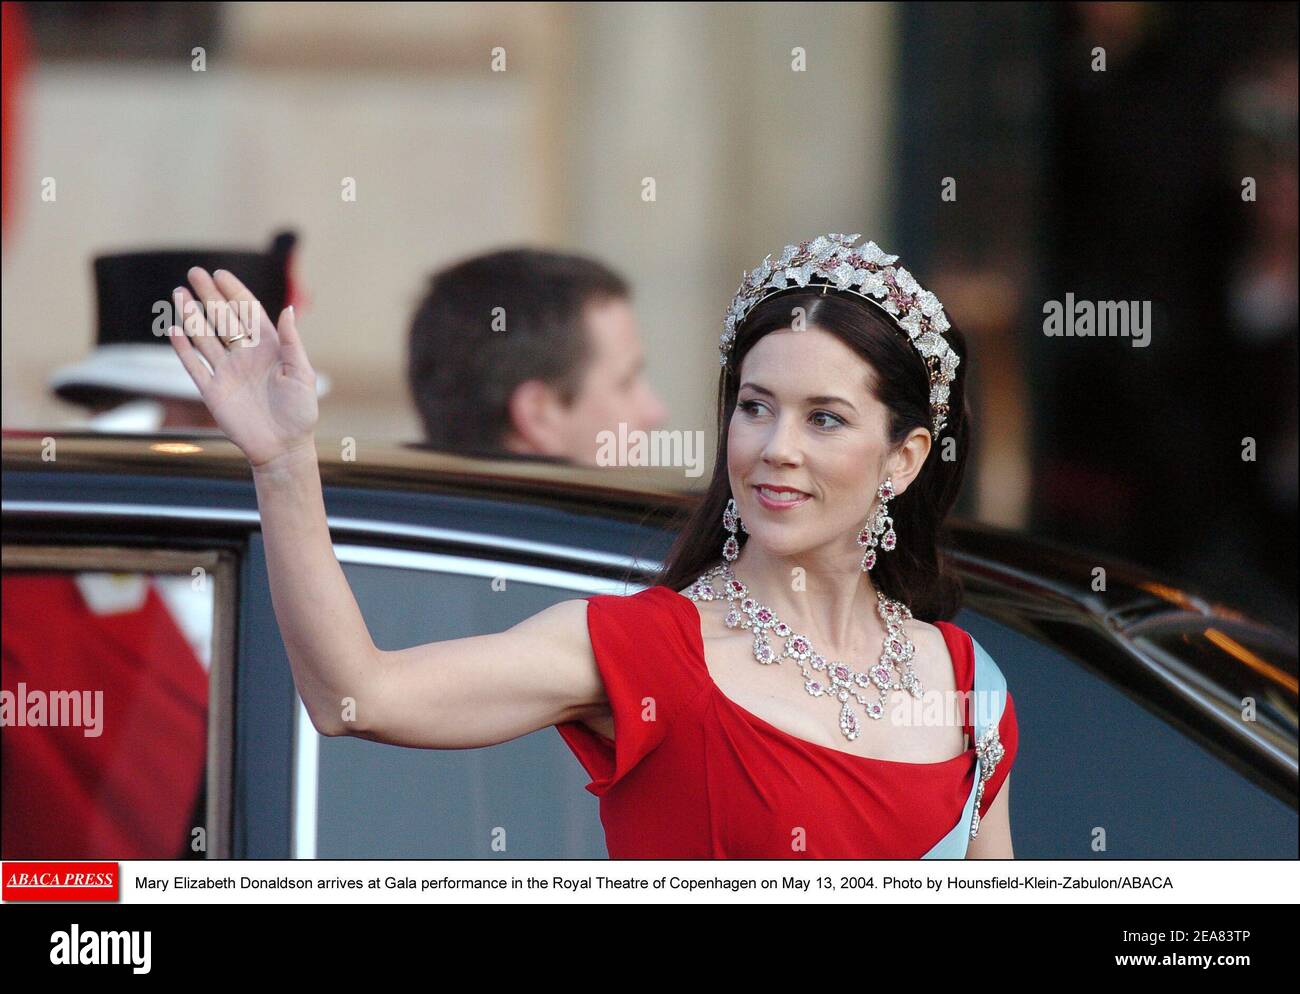 Mary Elizabeth Donaldson arrives at Gala performance in the Royal Theatre of Copenhagen on May 13, 2004. Photo by Hounsfield-Klein-Zabulon/ABACA Stock Photo